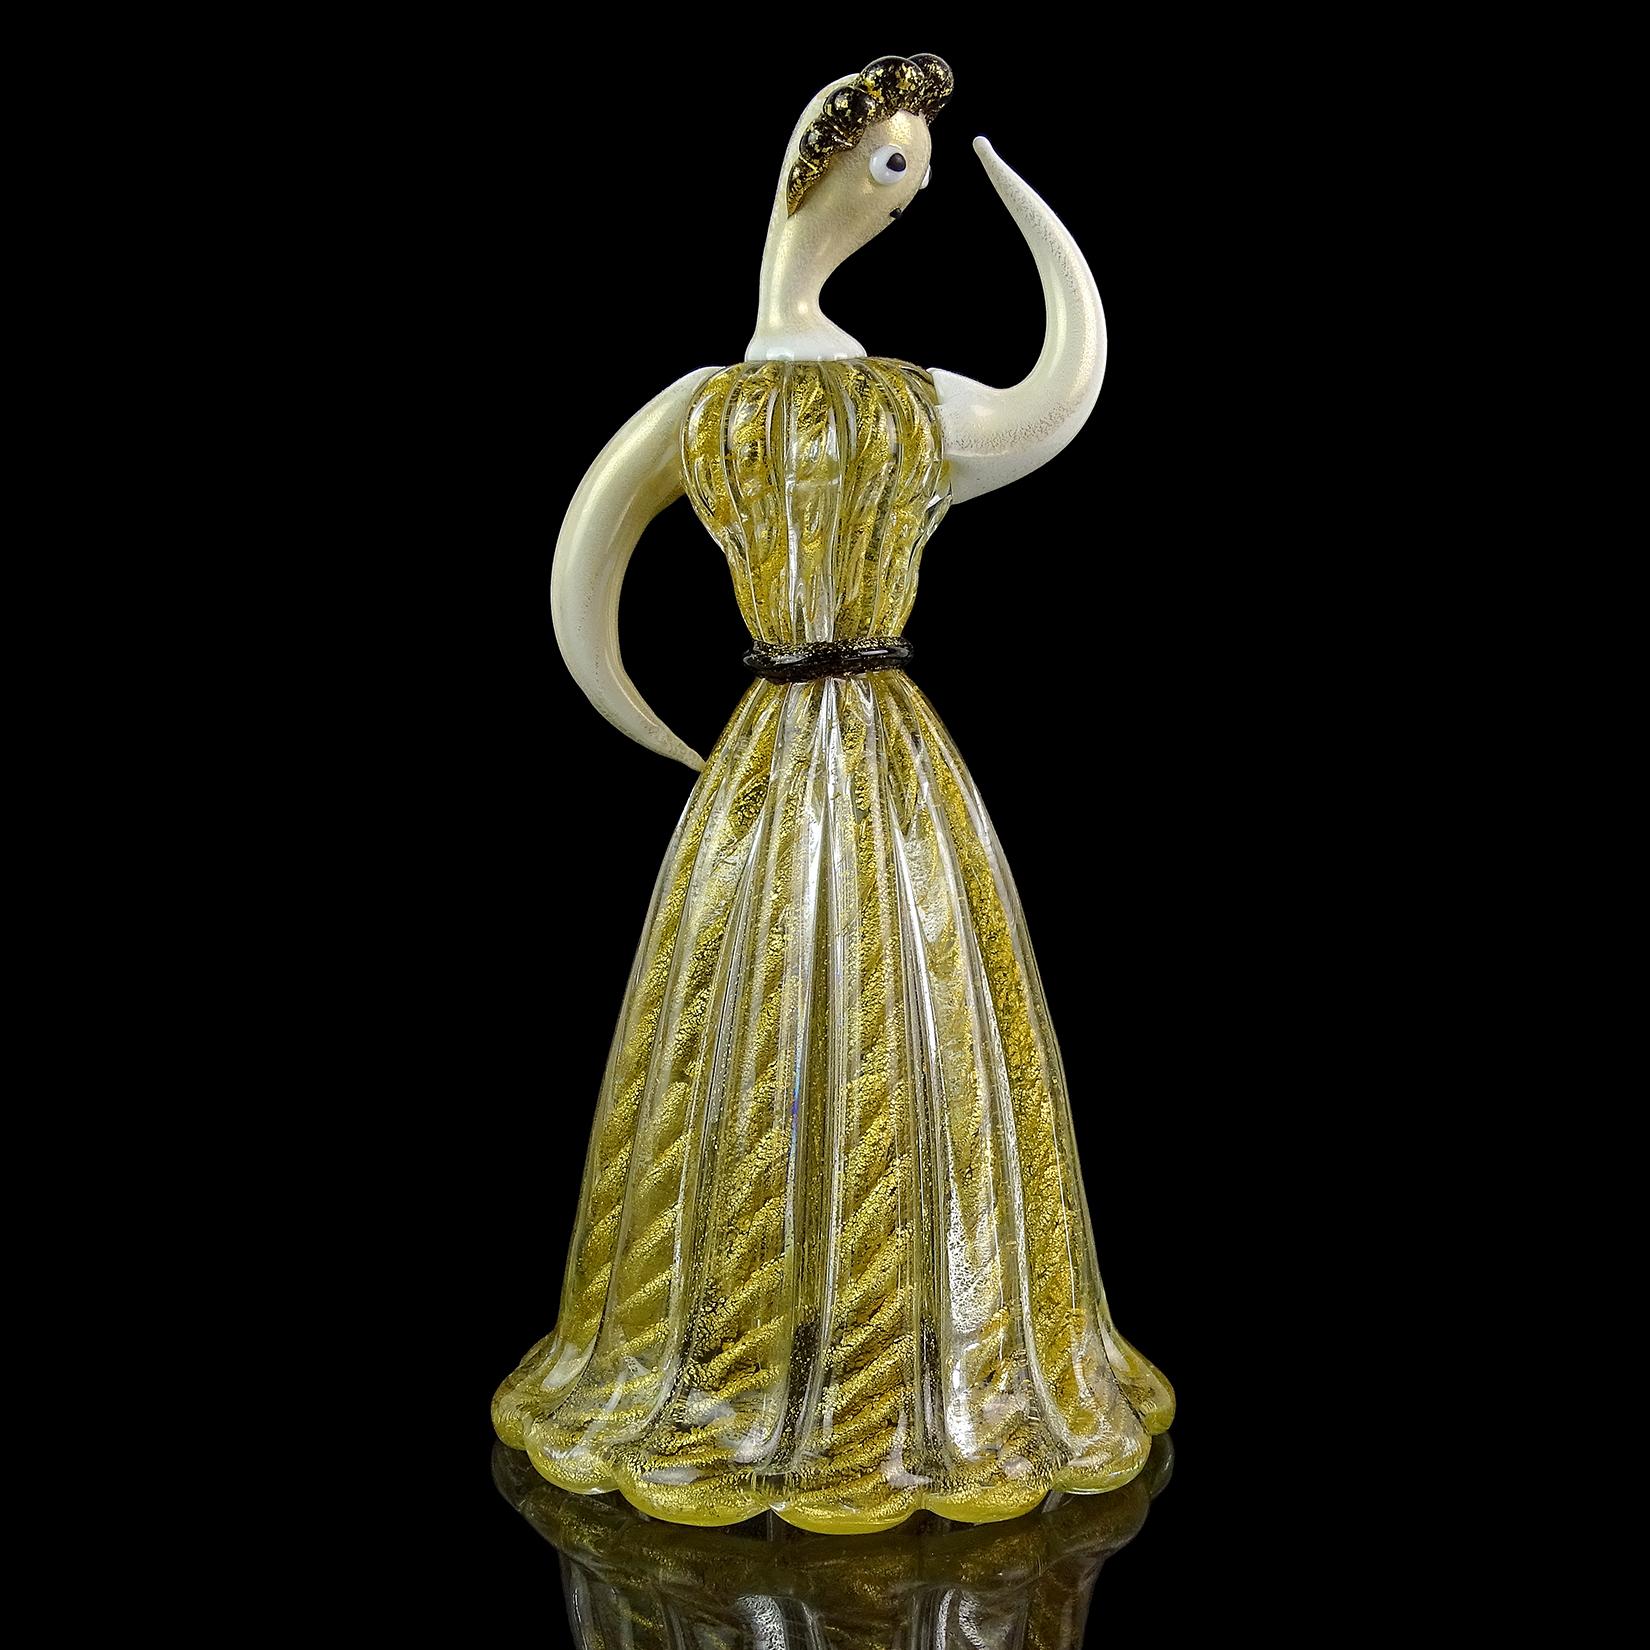 Beautiful and rare, vintage Murano hand blown white glass, black accents and gold flecks Italian art glass woman sculpture. Documented to designer Ercole Barovier for Barovier e Toso. The figure is made with white 